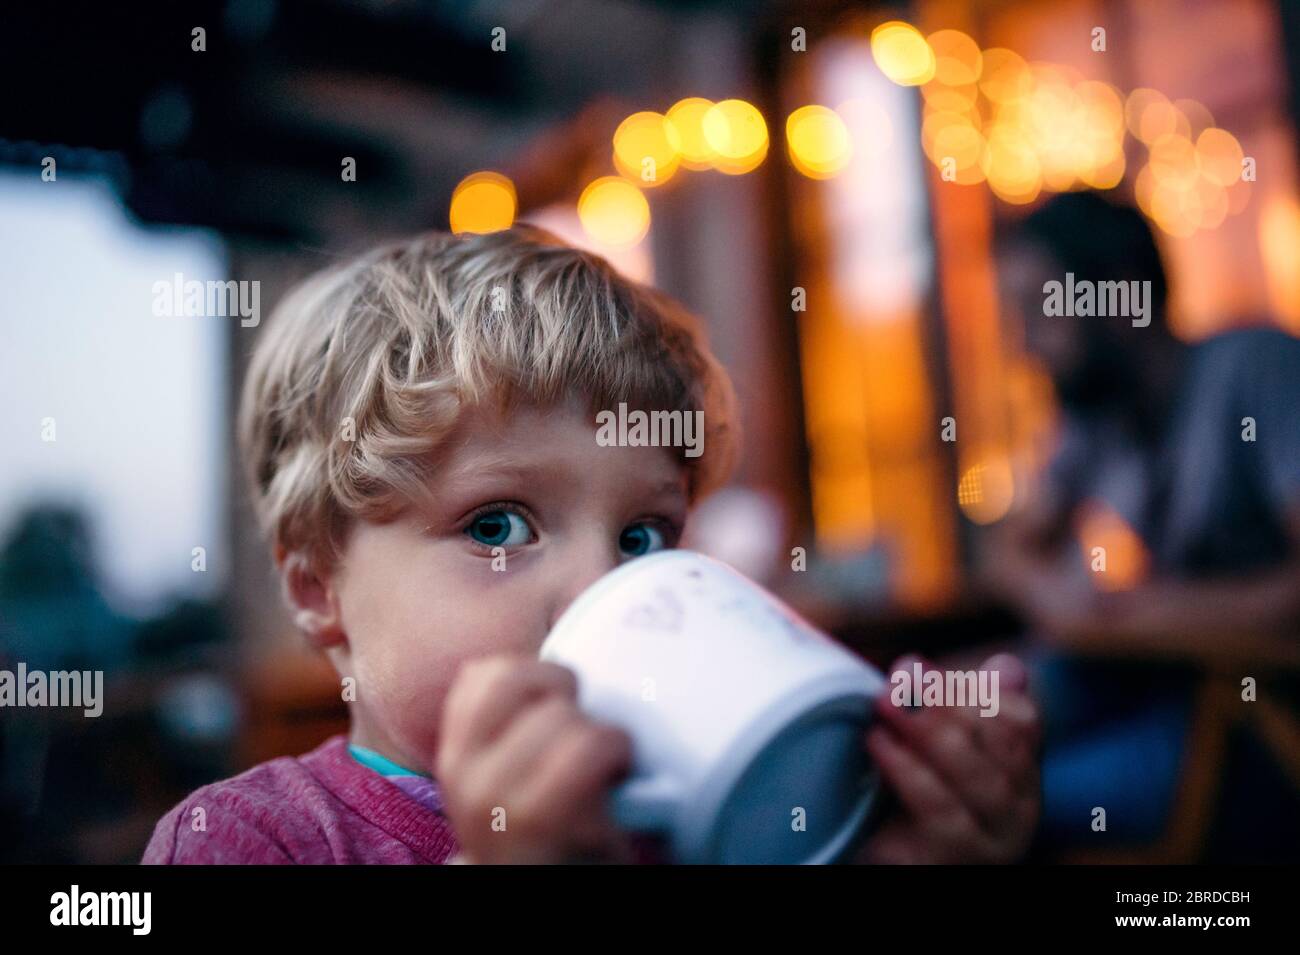 https://c8.alamy.com/comp/2BRDCBH/close-up-of-toddler-boy-standing-outdoors-drinking-from-cup-2BRDCBH.jpg